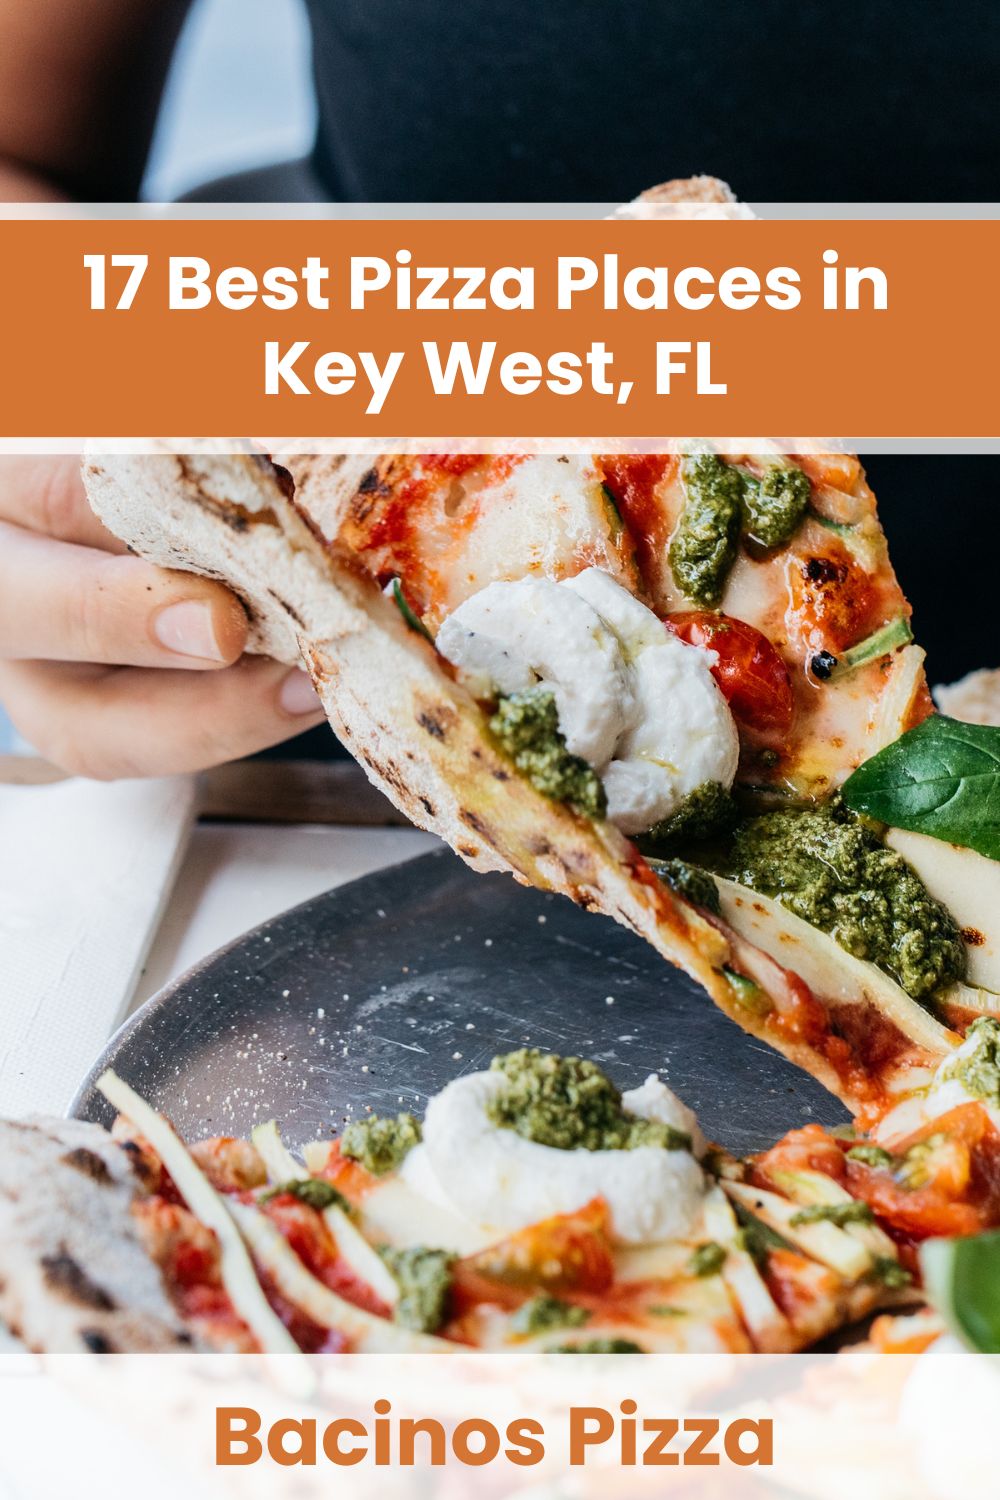 Best Pizza Places in Key West